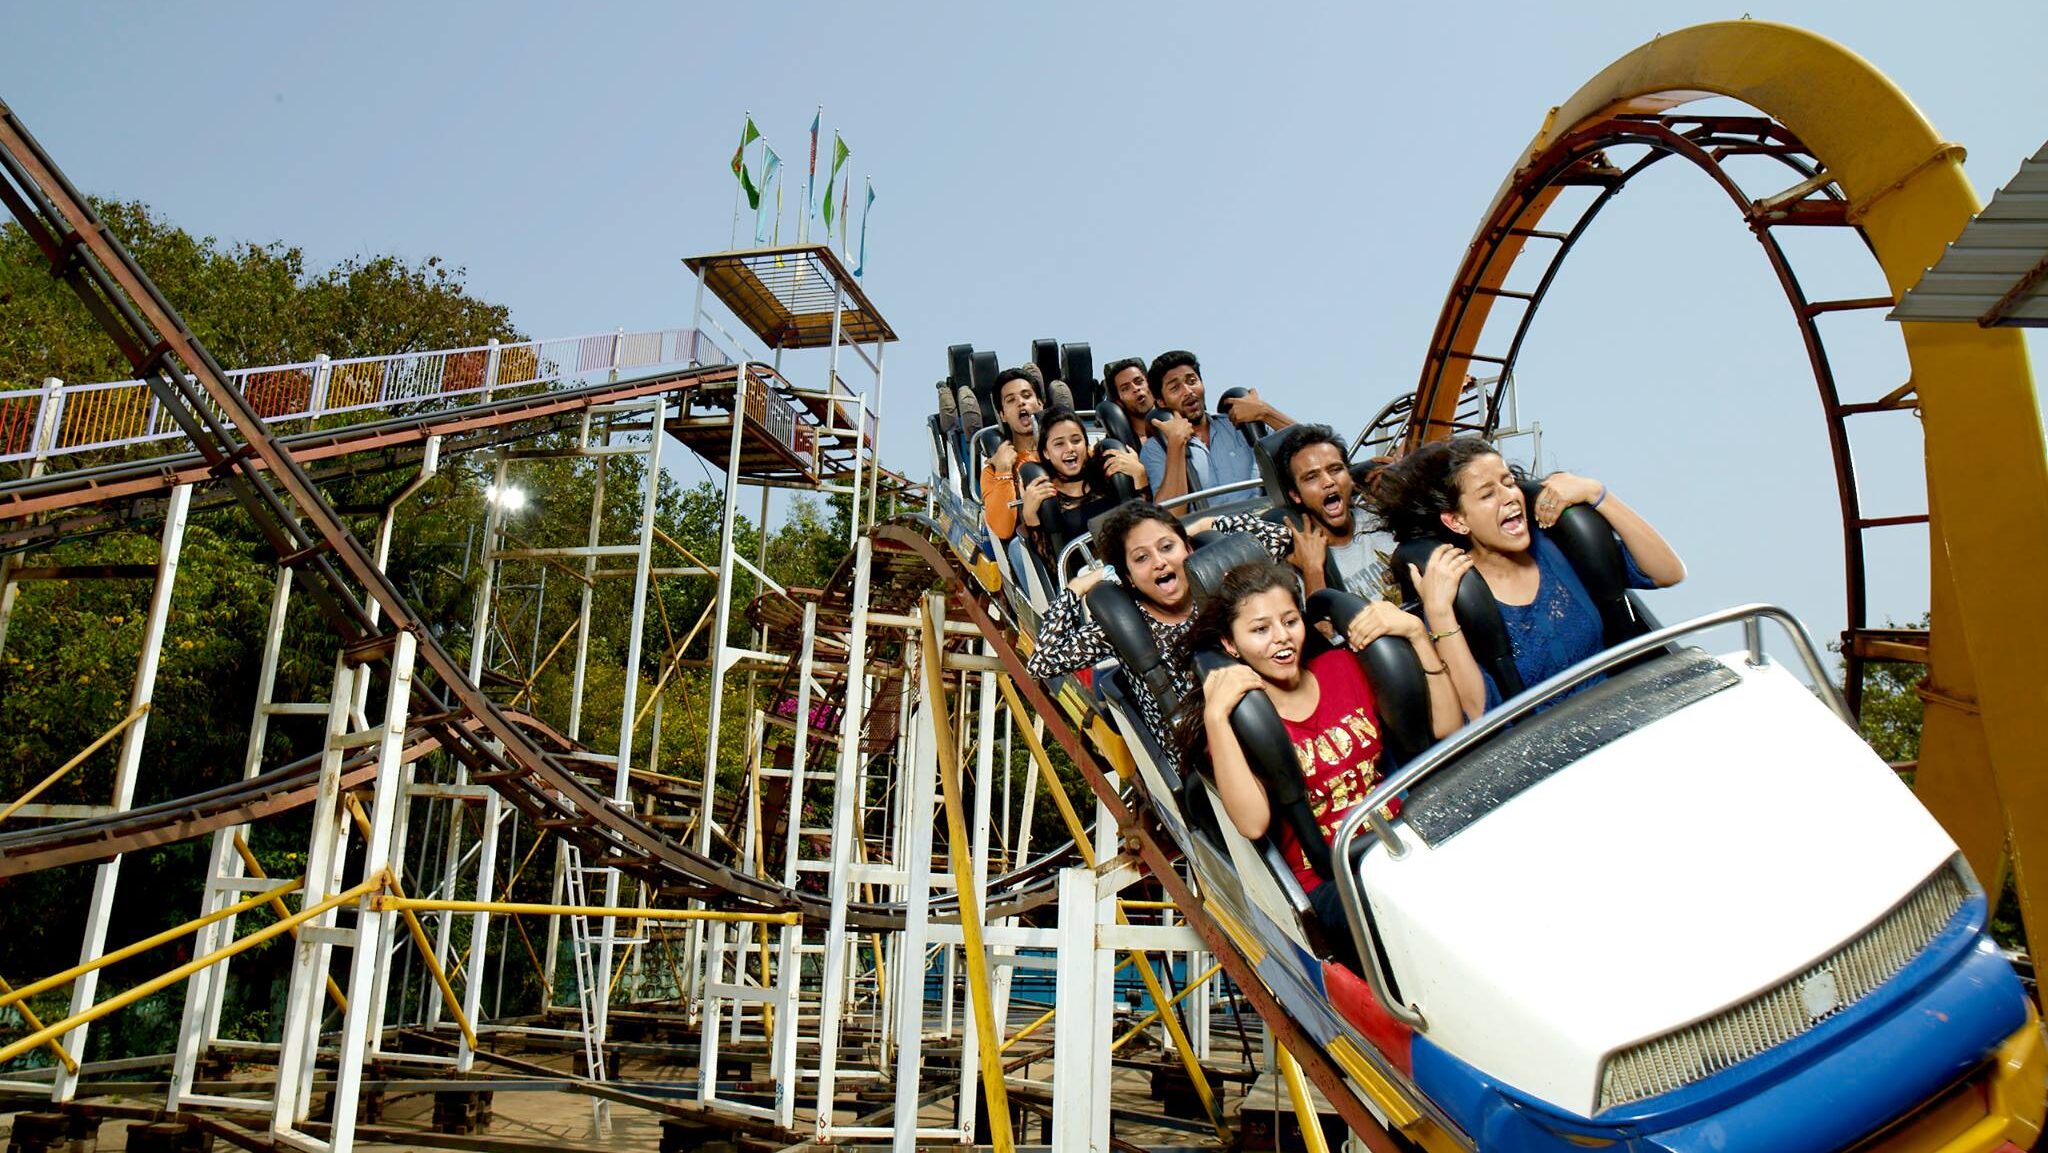 Essel World is one of the oldest and most popular amusement parks in India.